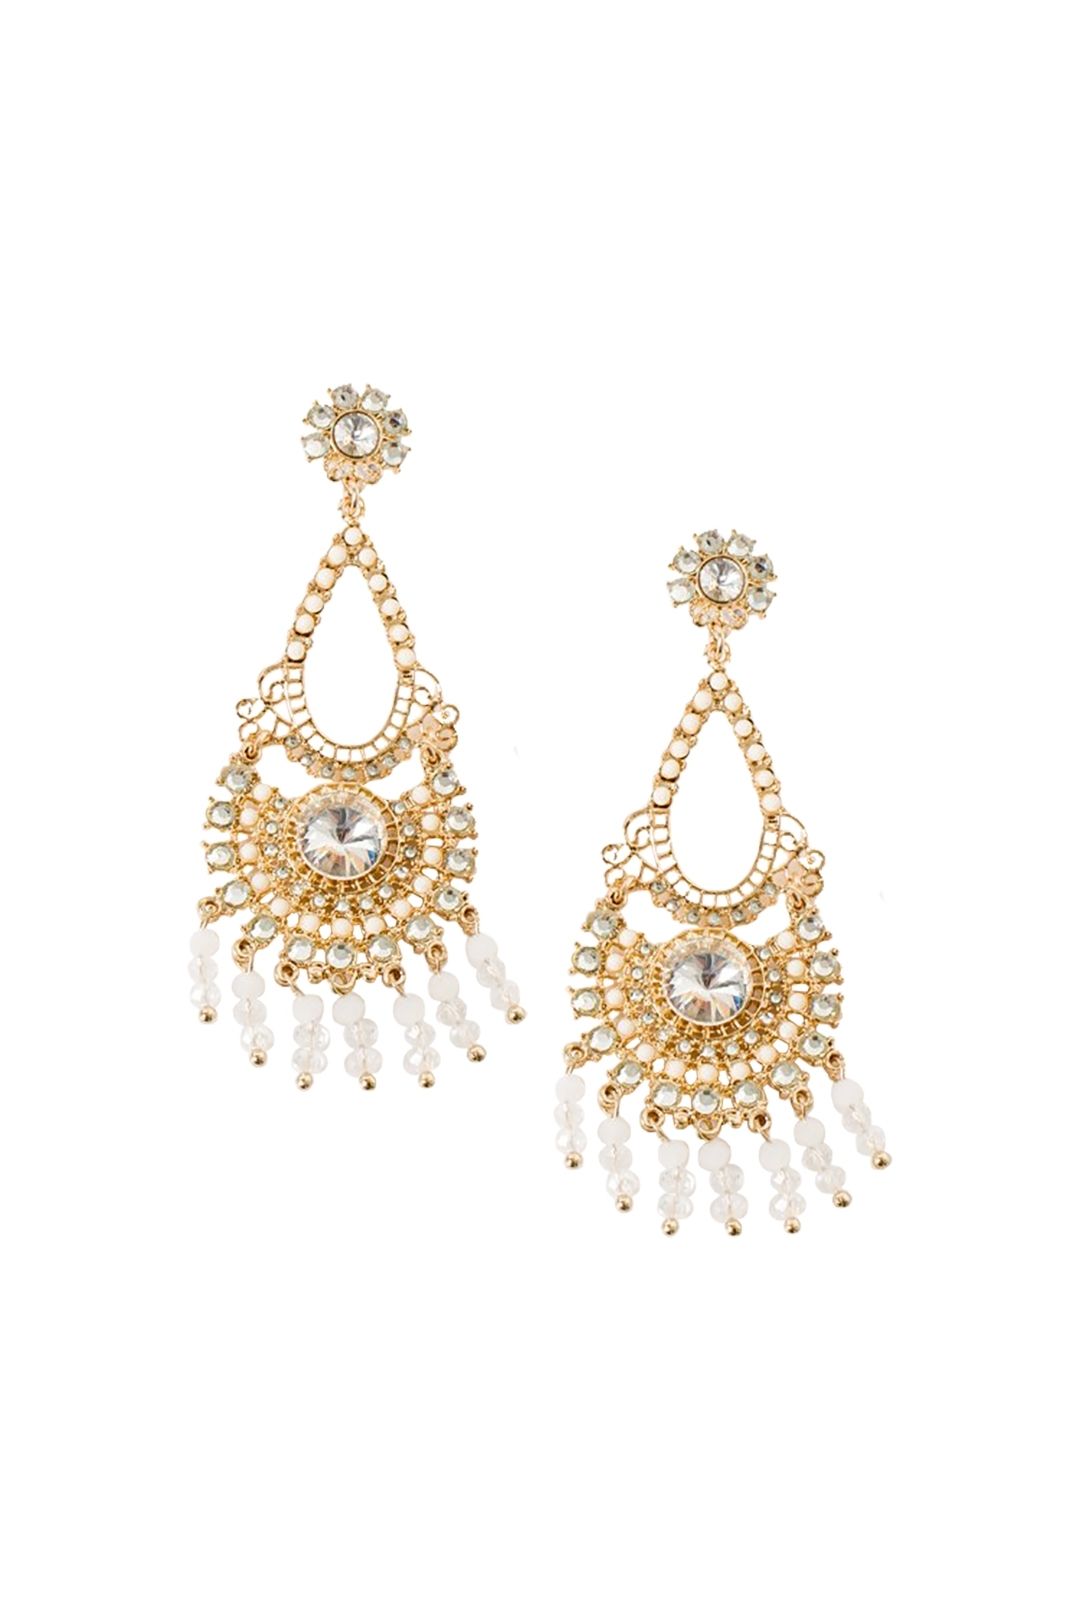 Adorne - Beaded Droplets Diamante Earring - White Gold - Front